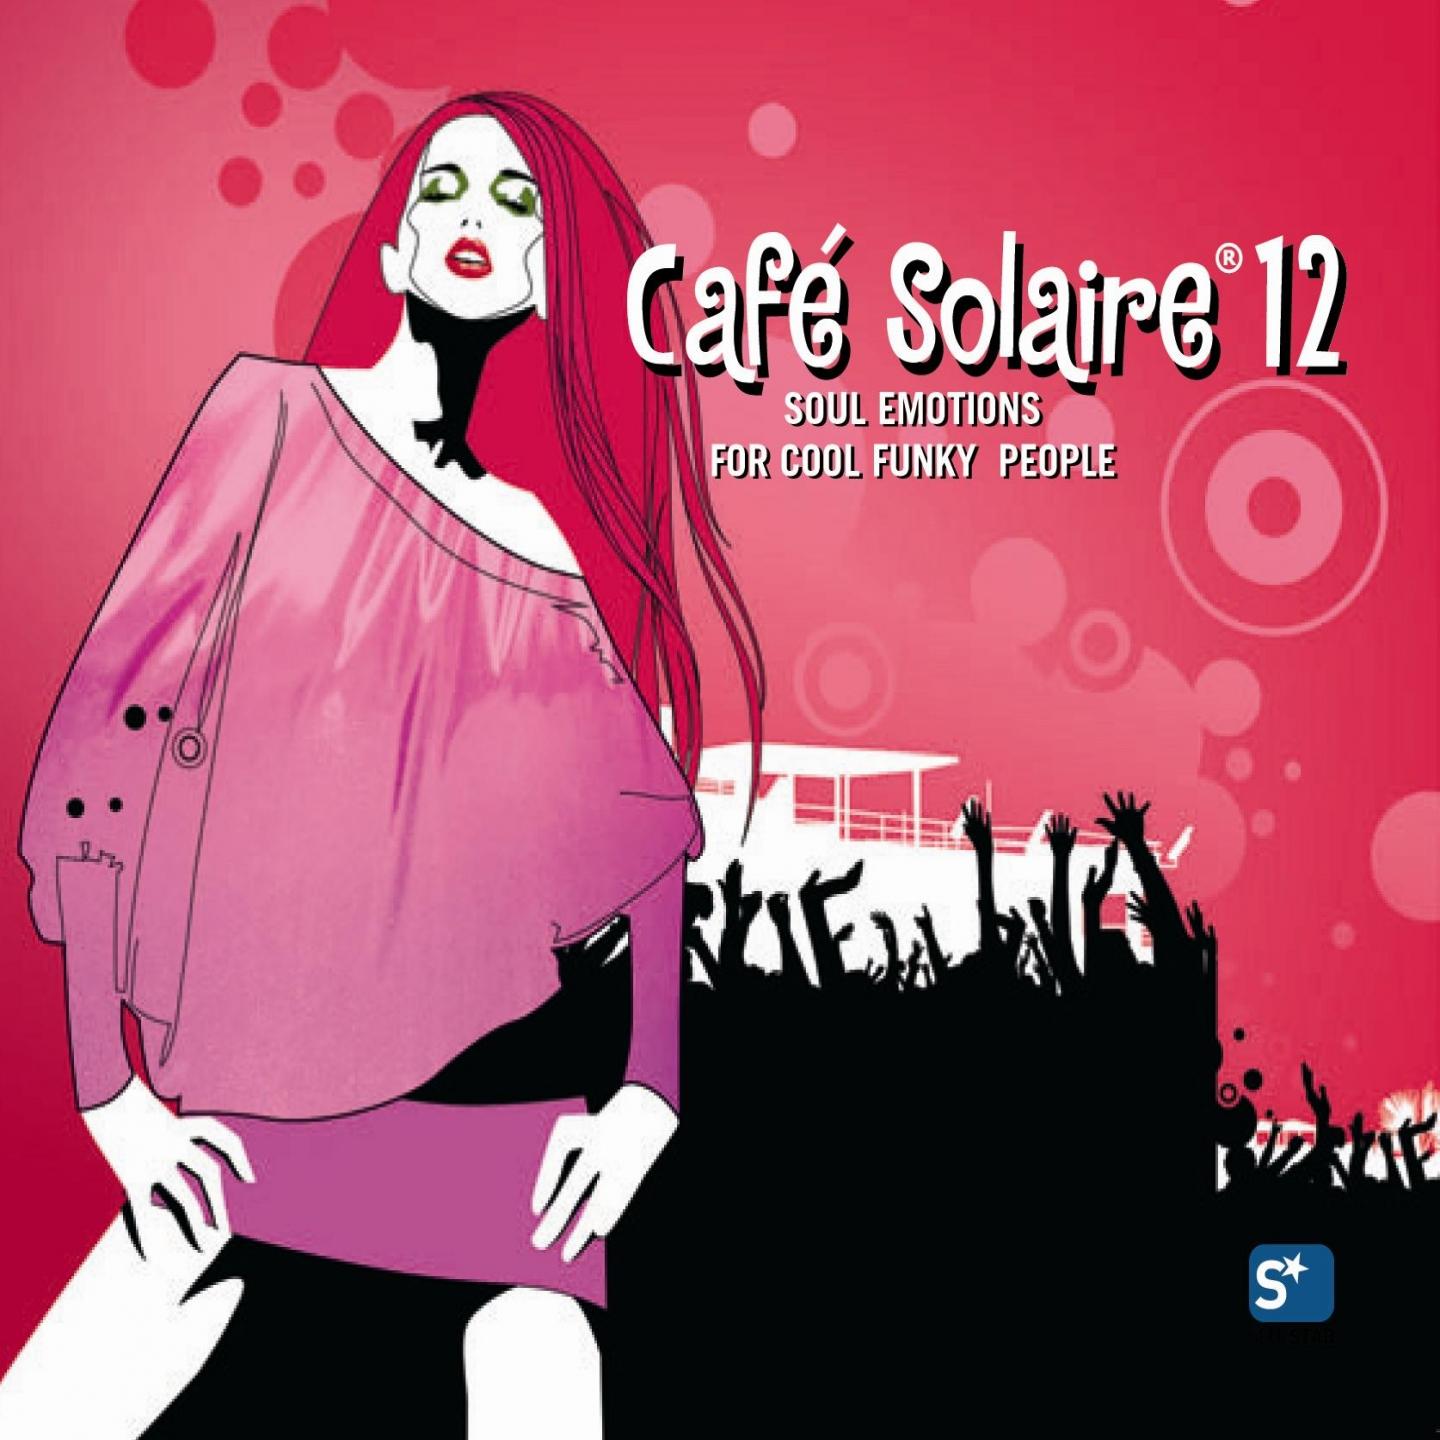 Cafe Solaire 12 Soul Emotions for Cool Funky People